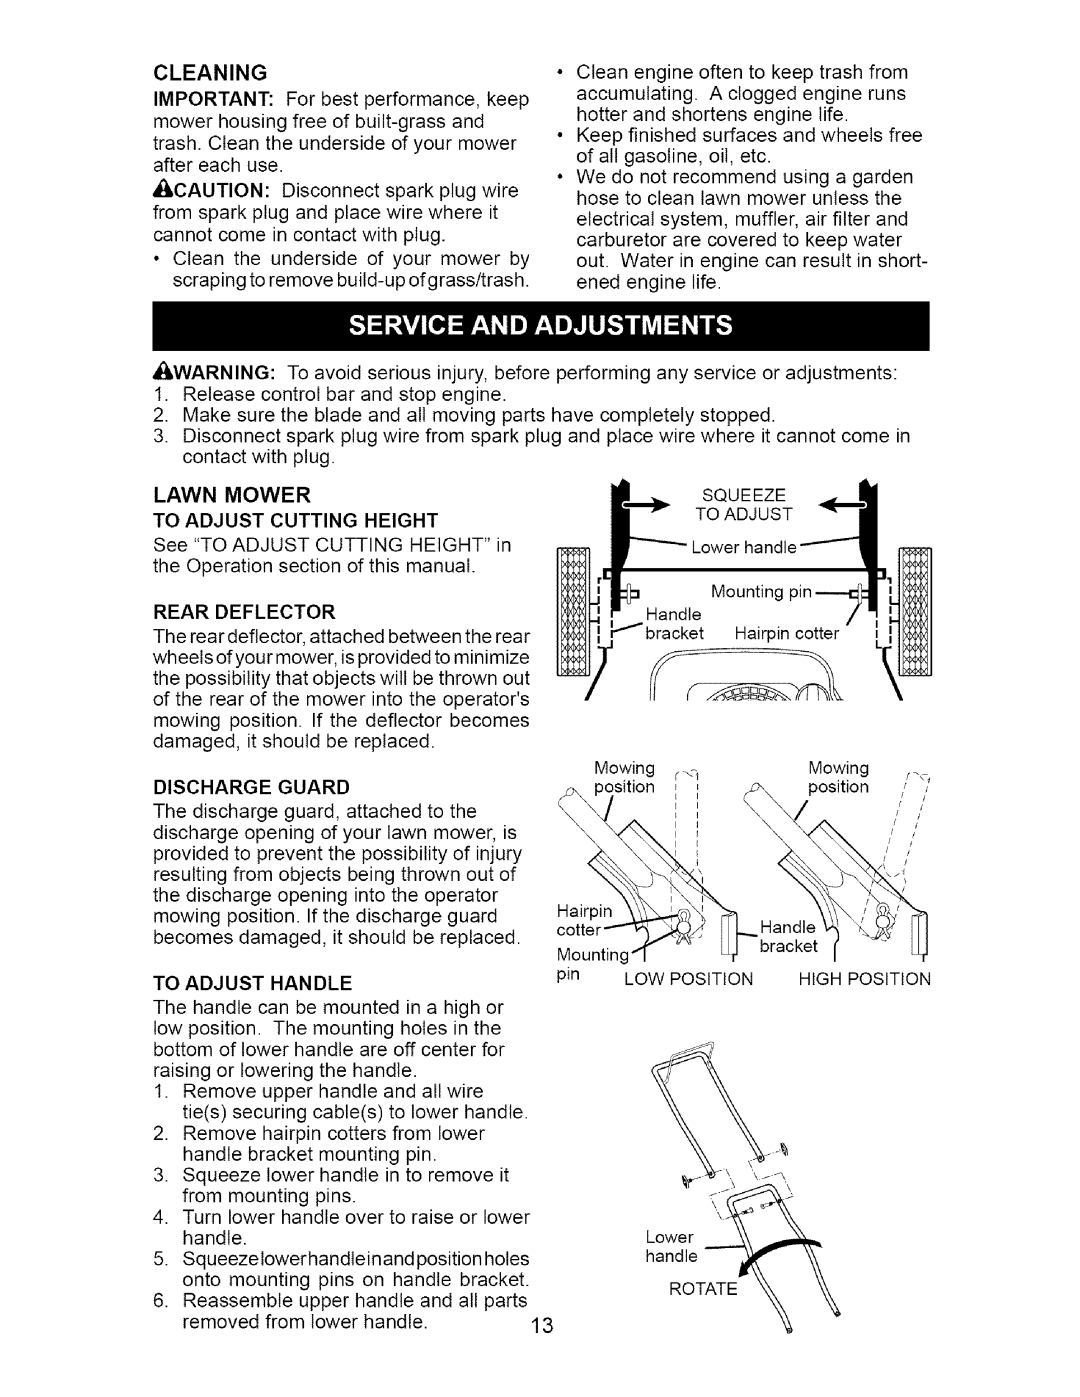 Craftsman 917.37134 owner manual Cleaning, Lawn Mower To Adjust Cutting Height, To Adjust Handle 